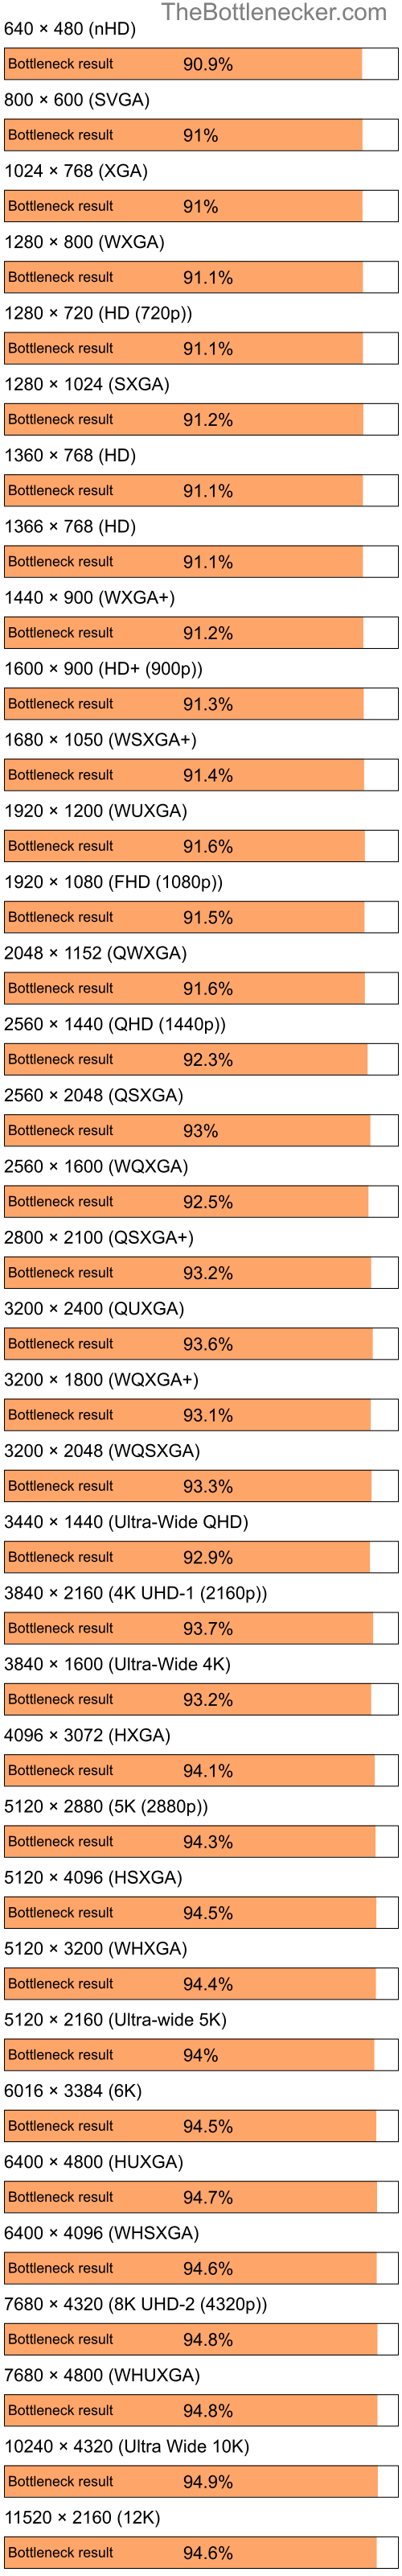 Bottleneck results by resolution for Intel Celeron and NVIDIA GeForce4 Ti 4200 in Graphic Card Intense Tasks